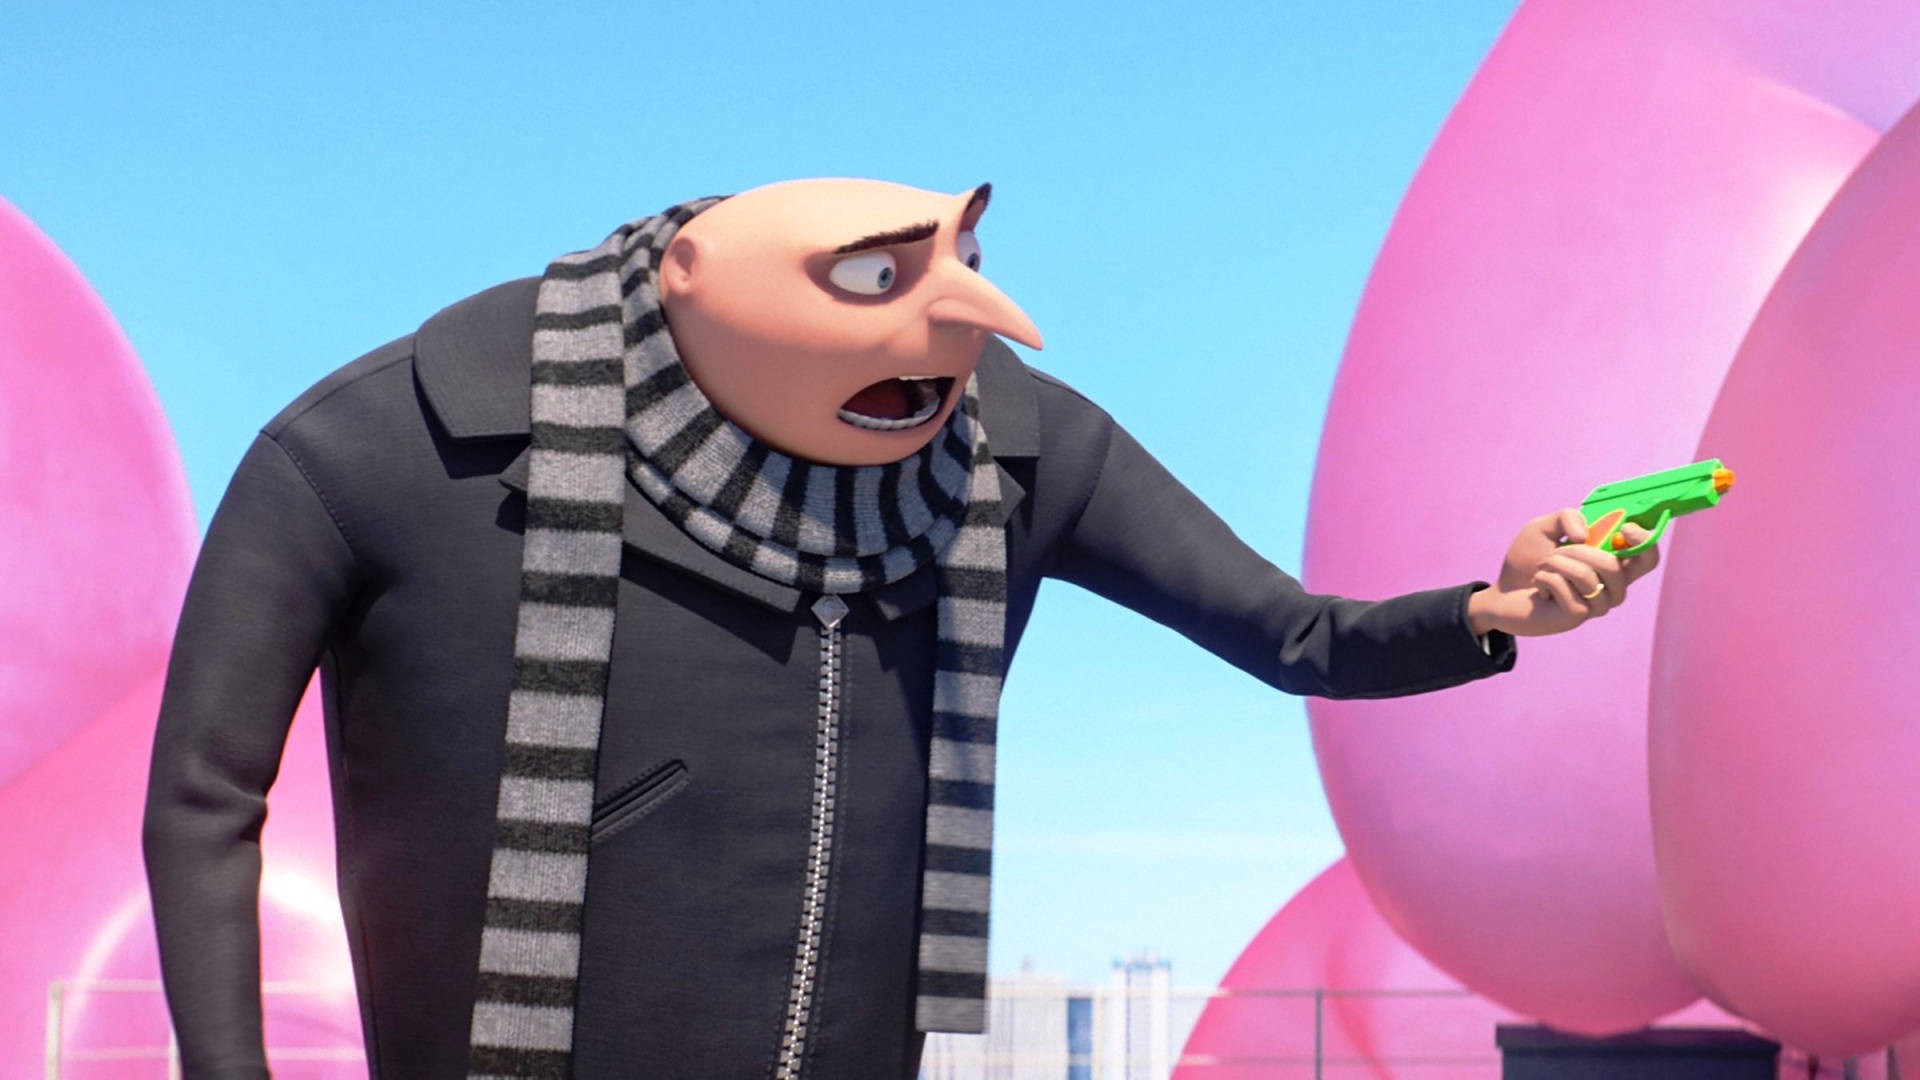 Felonious Gru Holding Toy Gun Despicable Me 3 Picture